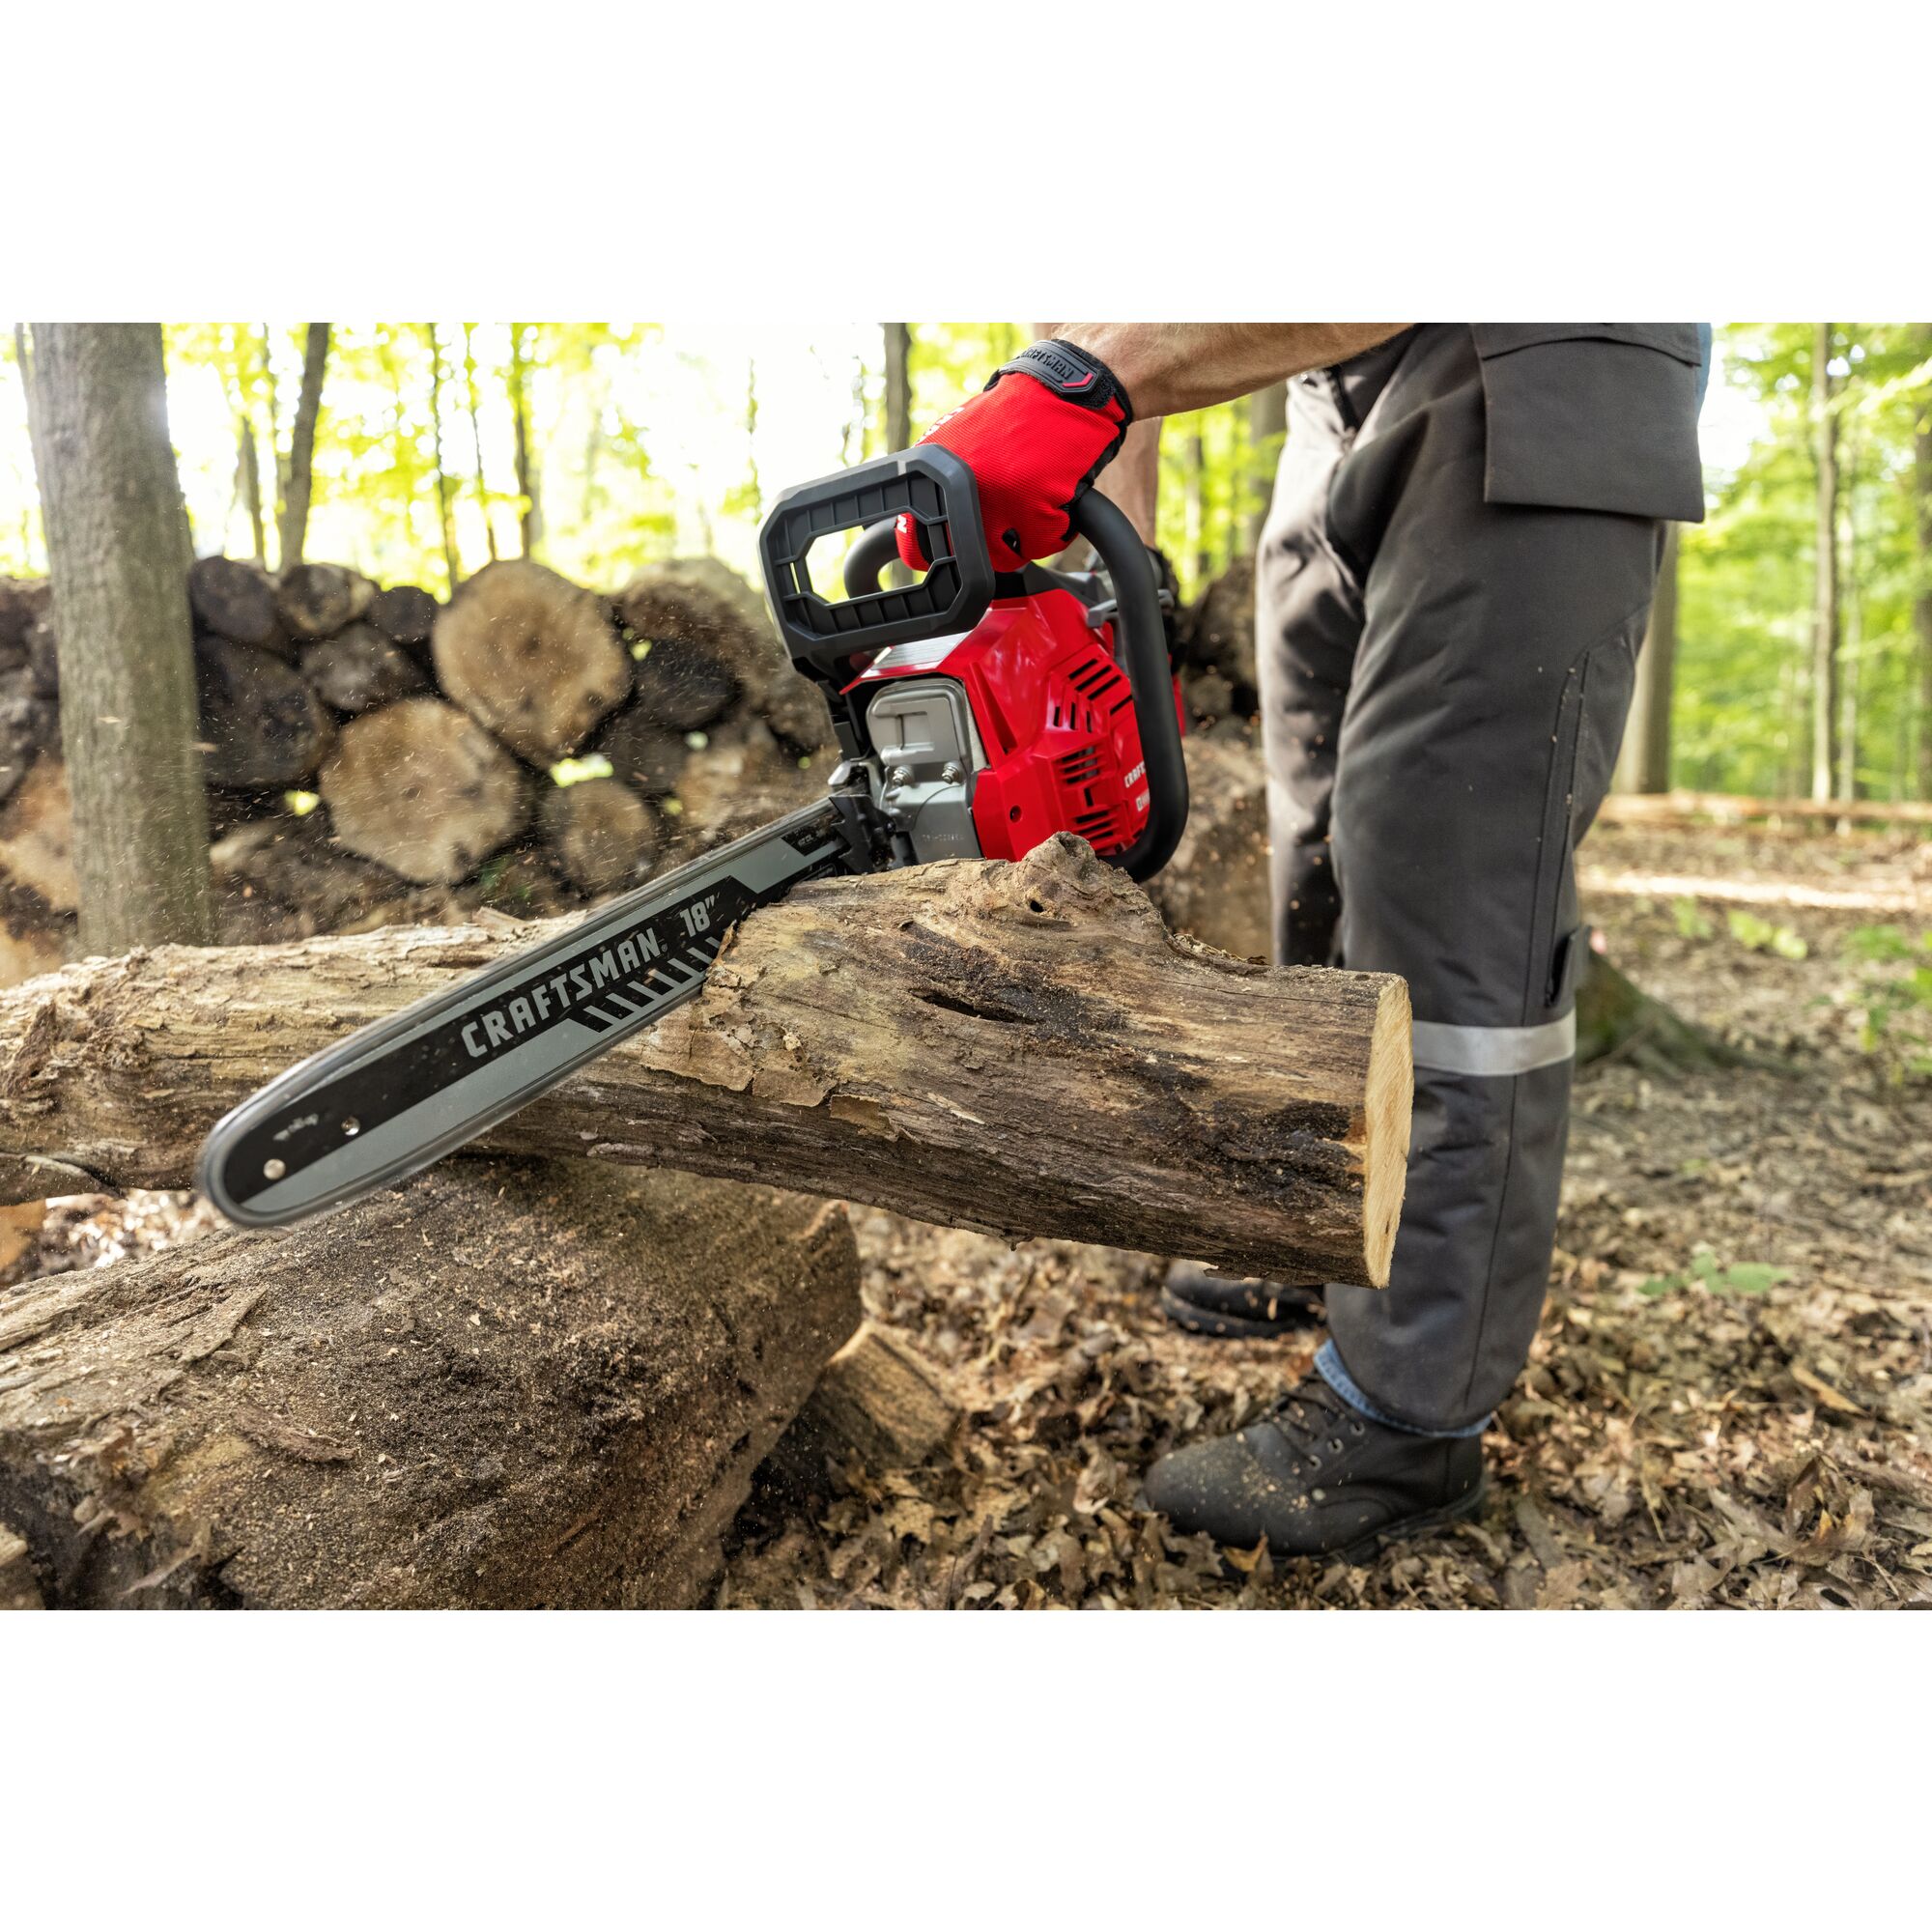 View of CRAFTSMAN Chain Saws  being used by consumer